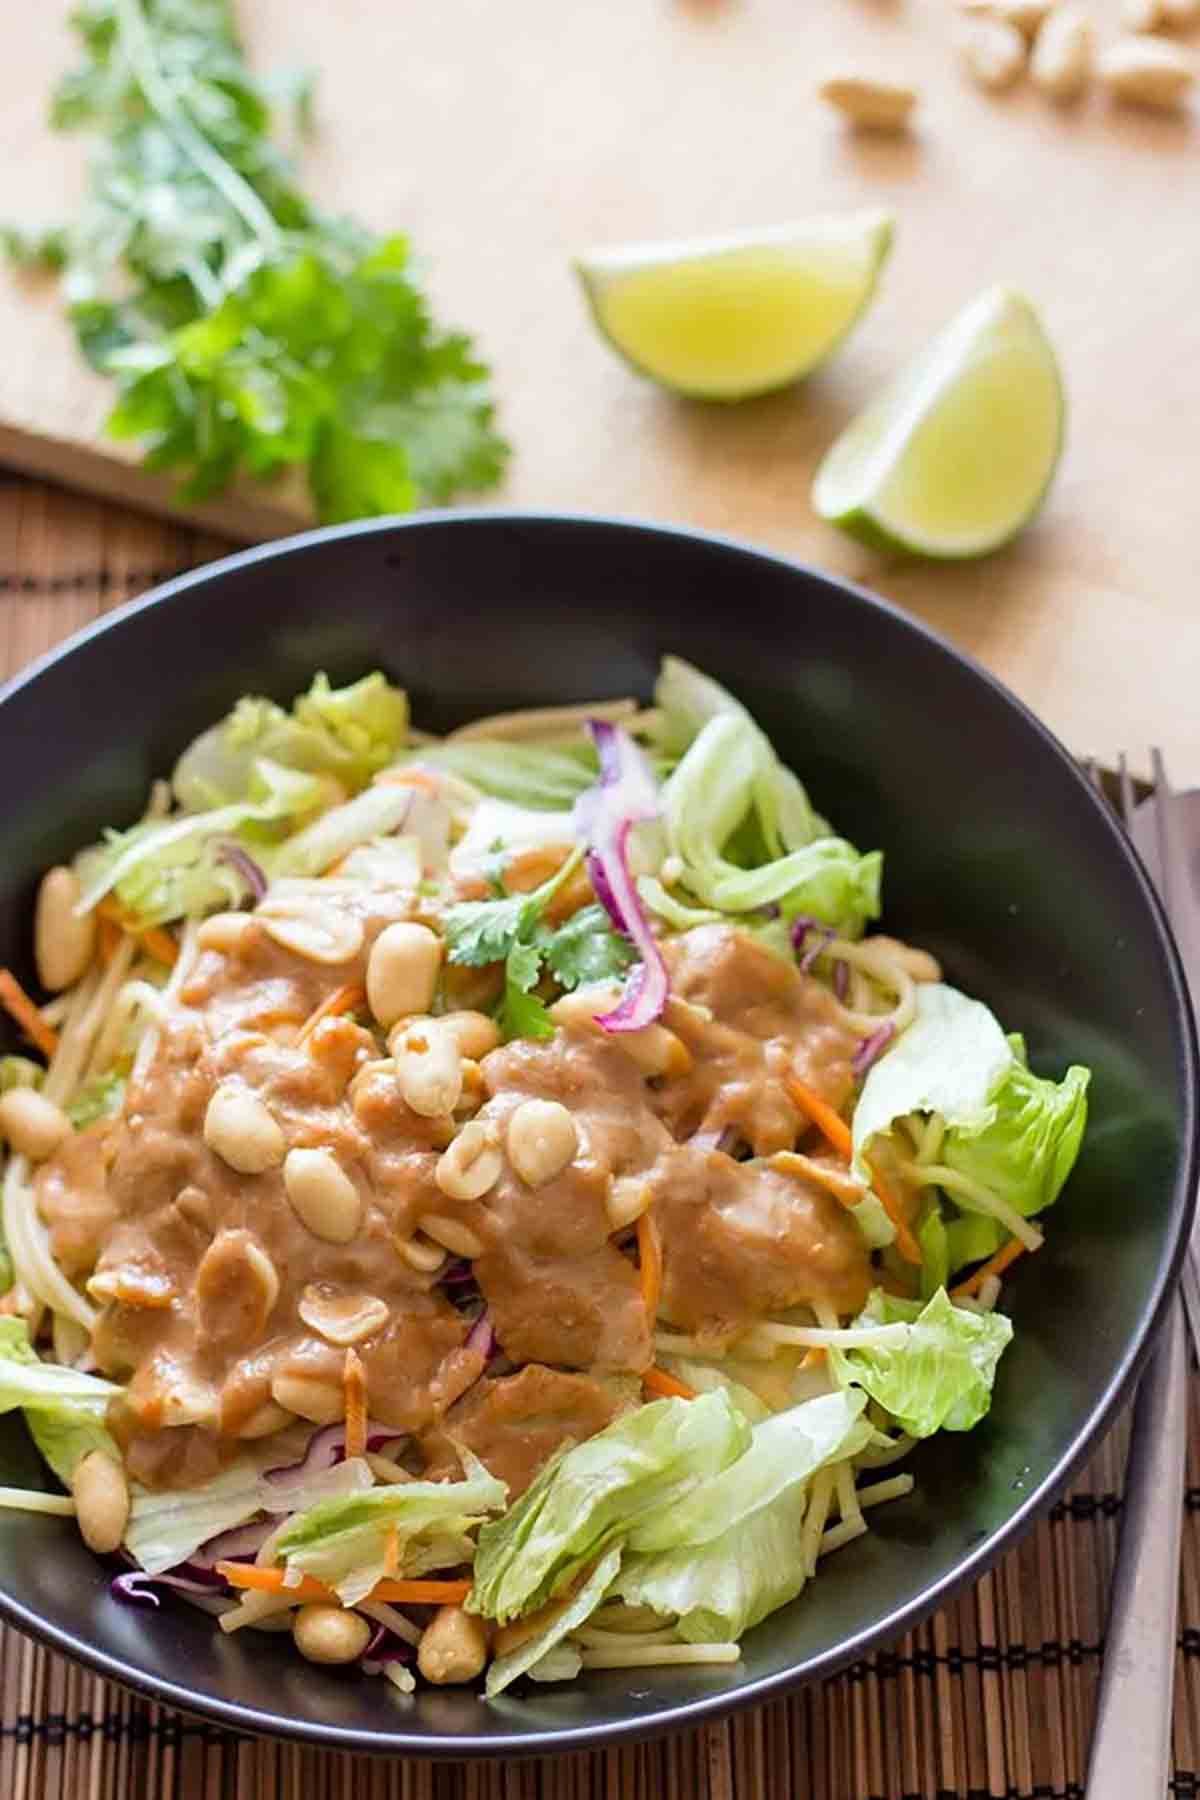 Pasta Salad With Peanut Butter Dressing